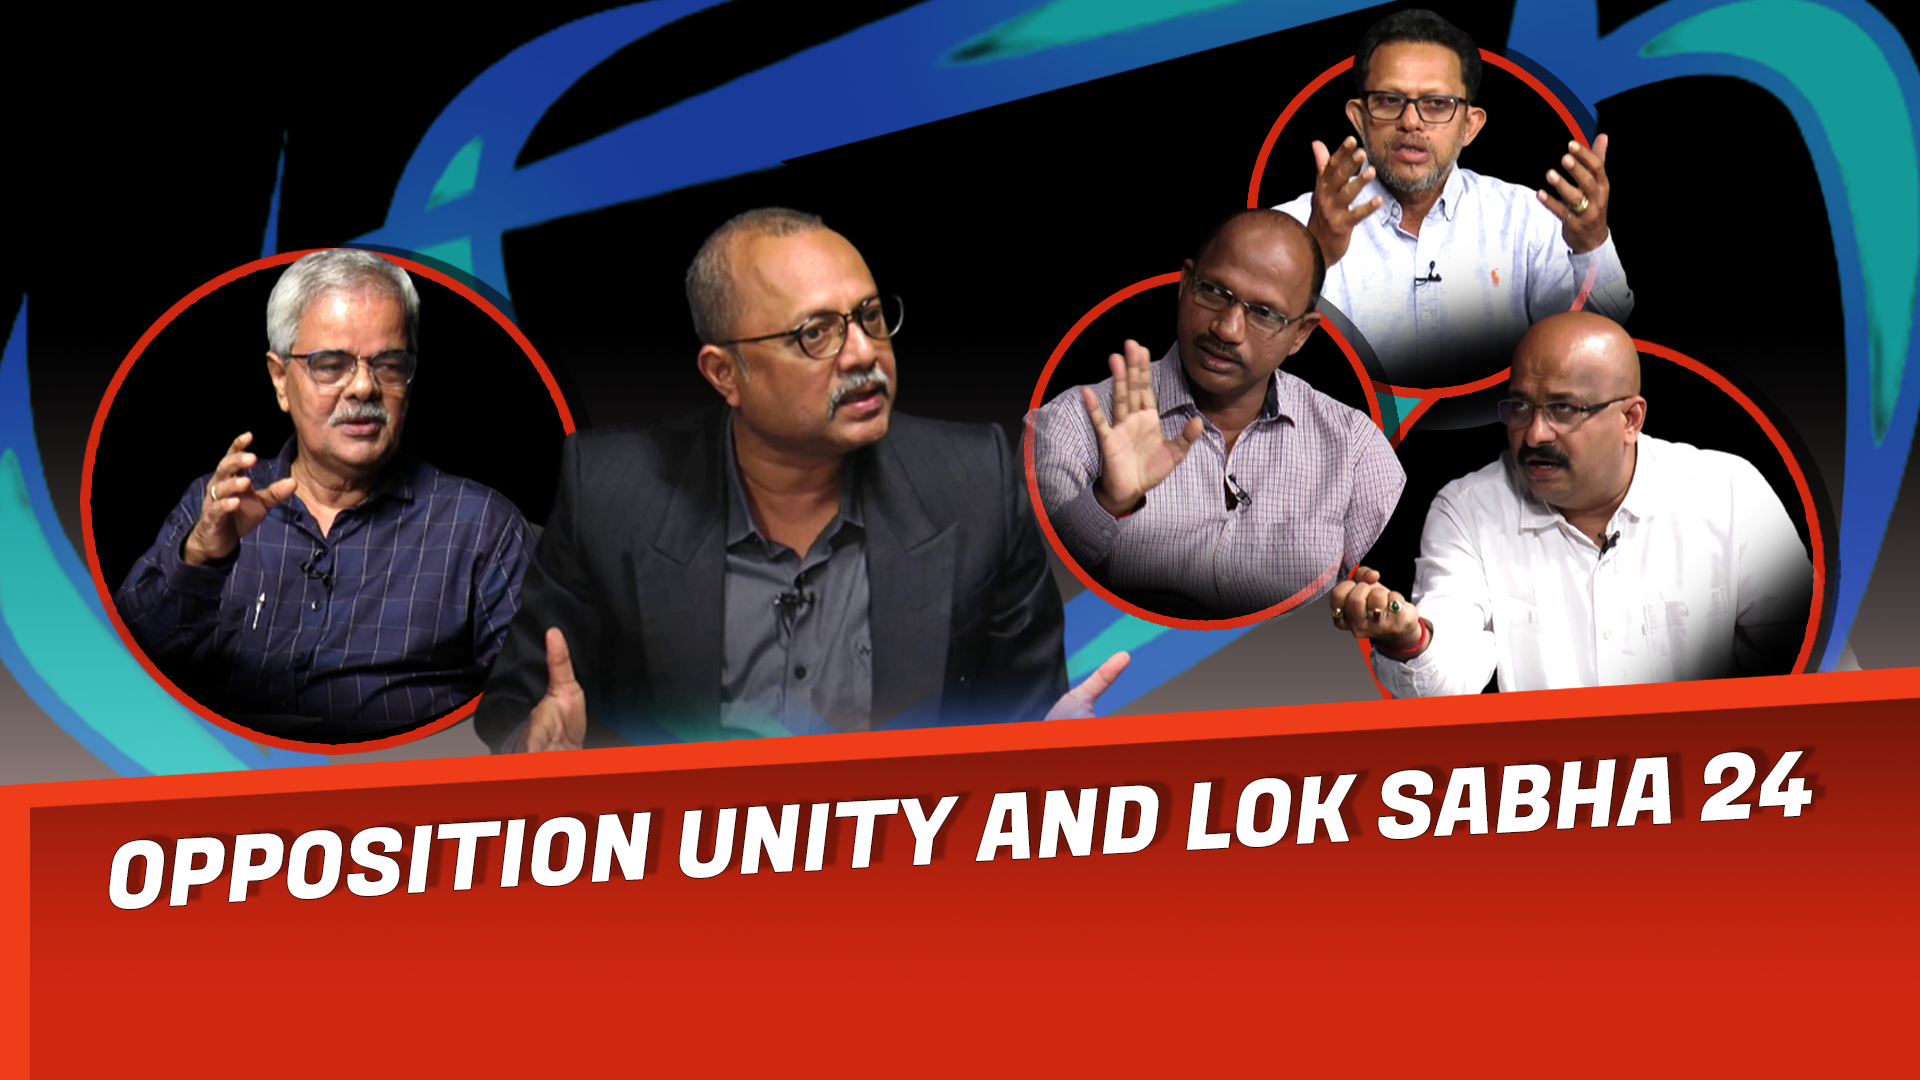 STORY BEHIND THE STORY: OPPOSITION UNITY AND LOK SABHA 24 || PART II